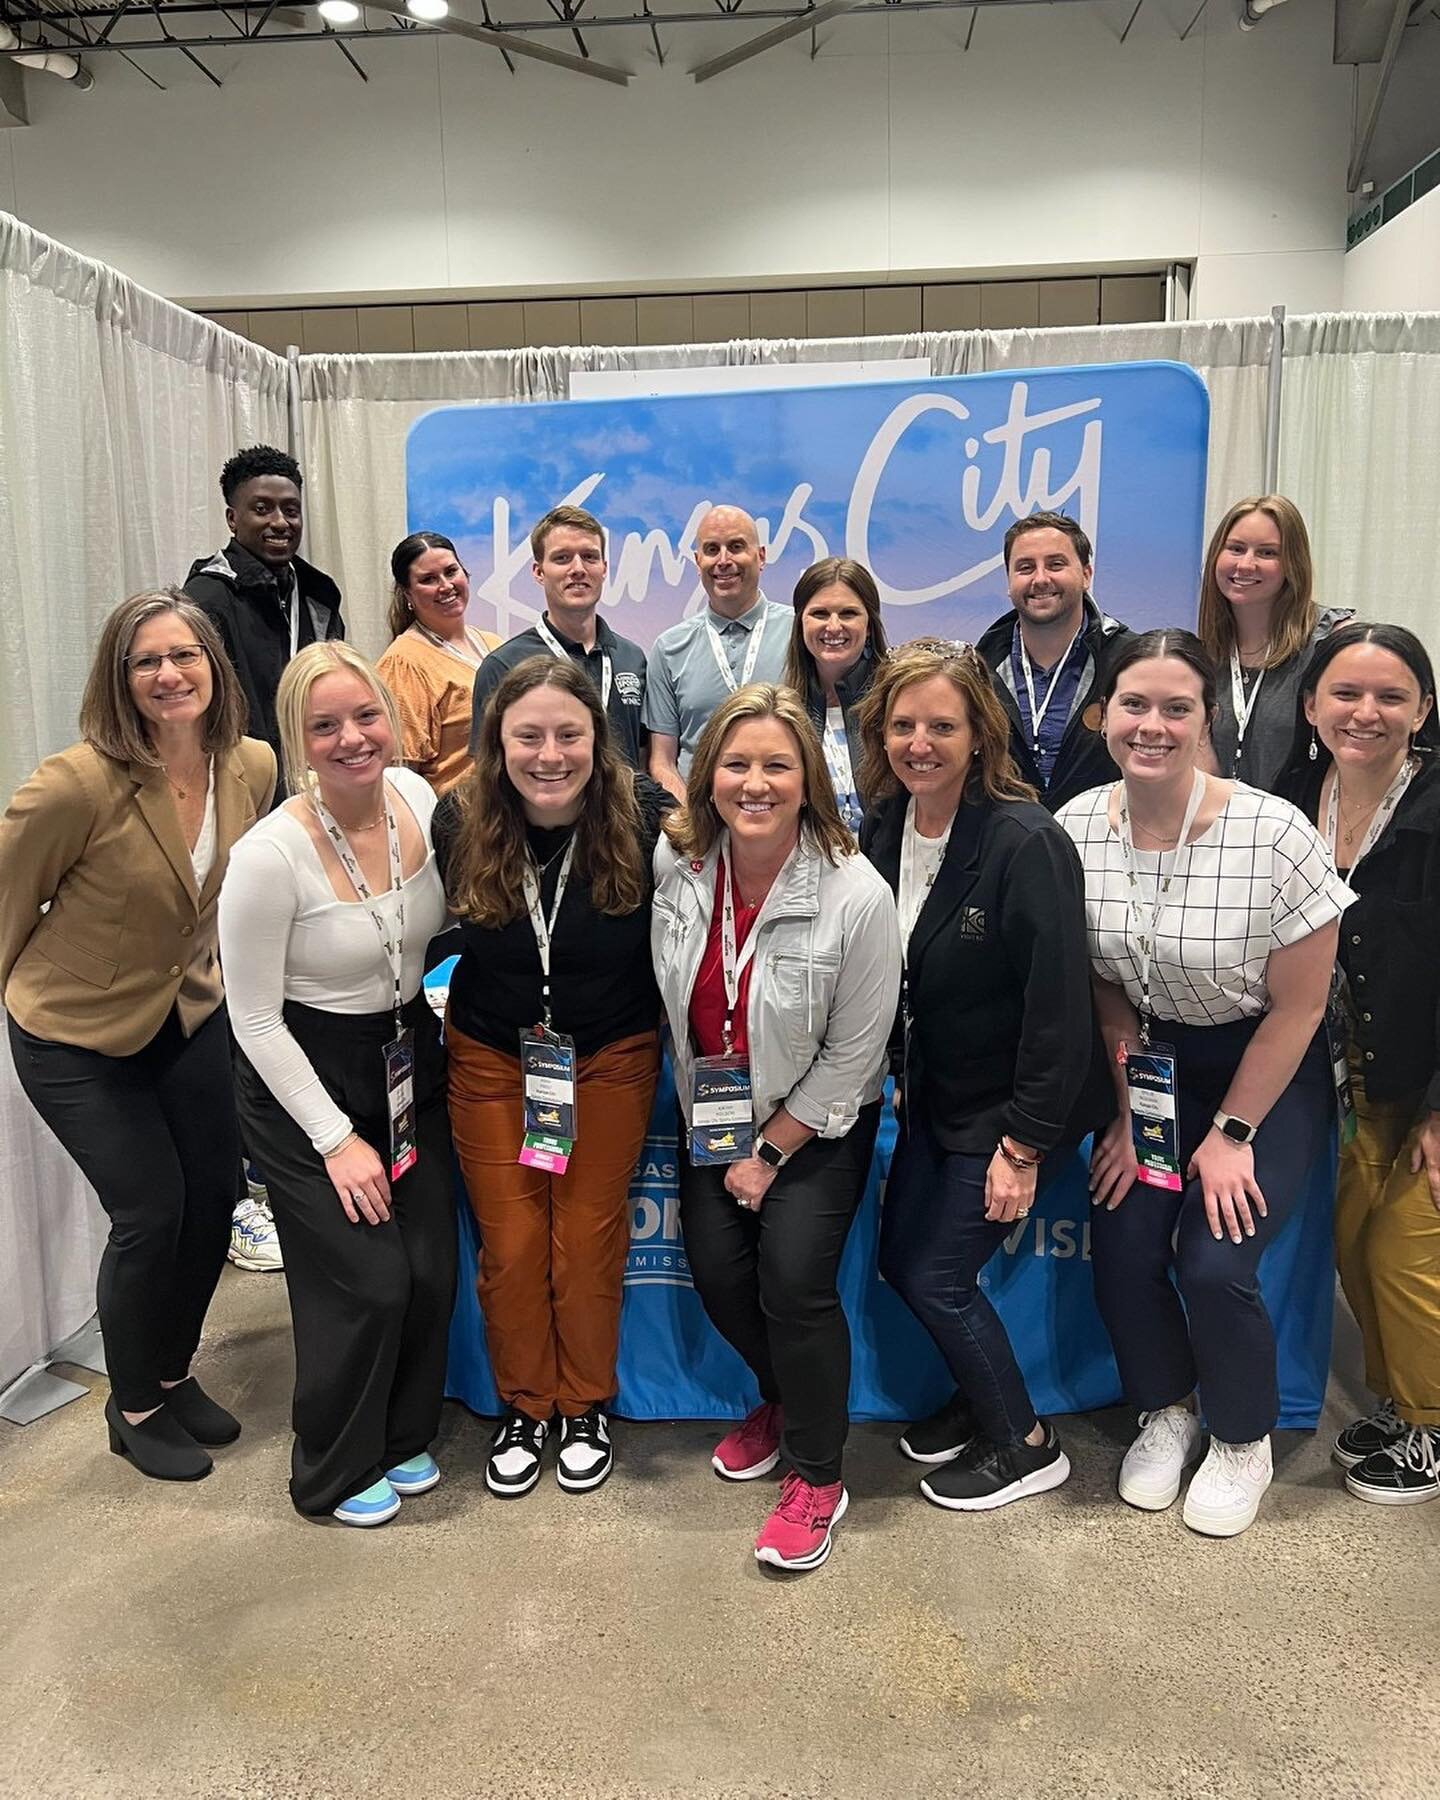 Together with our friends at @VisitKC, we have officially wrapped up @Sports_ETA in Kansas City! Our staff had a great time presenting, learning, and networking with our peers in the sports events and tourism industry.

The Sports ETA Symposium is th